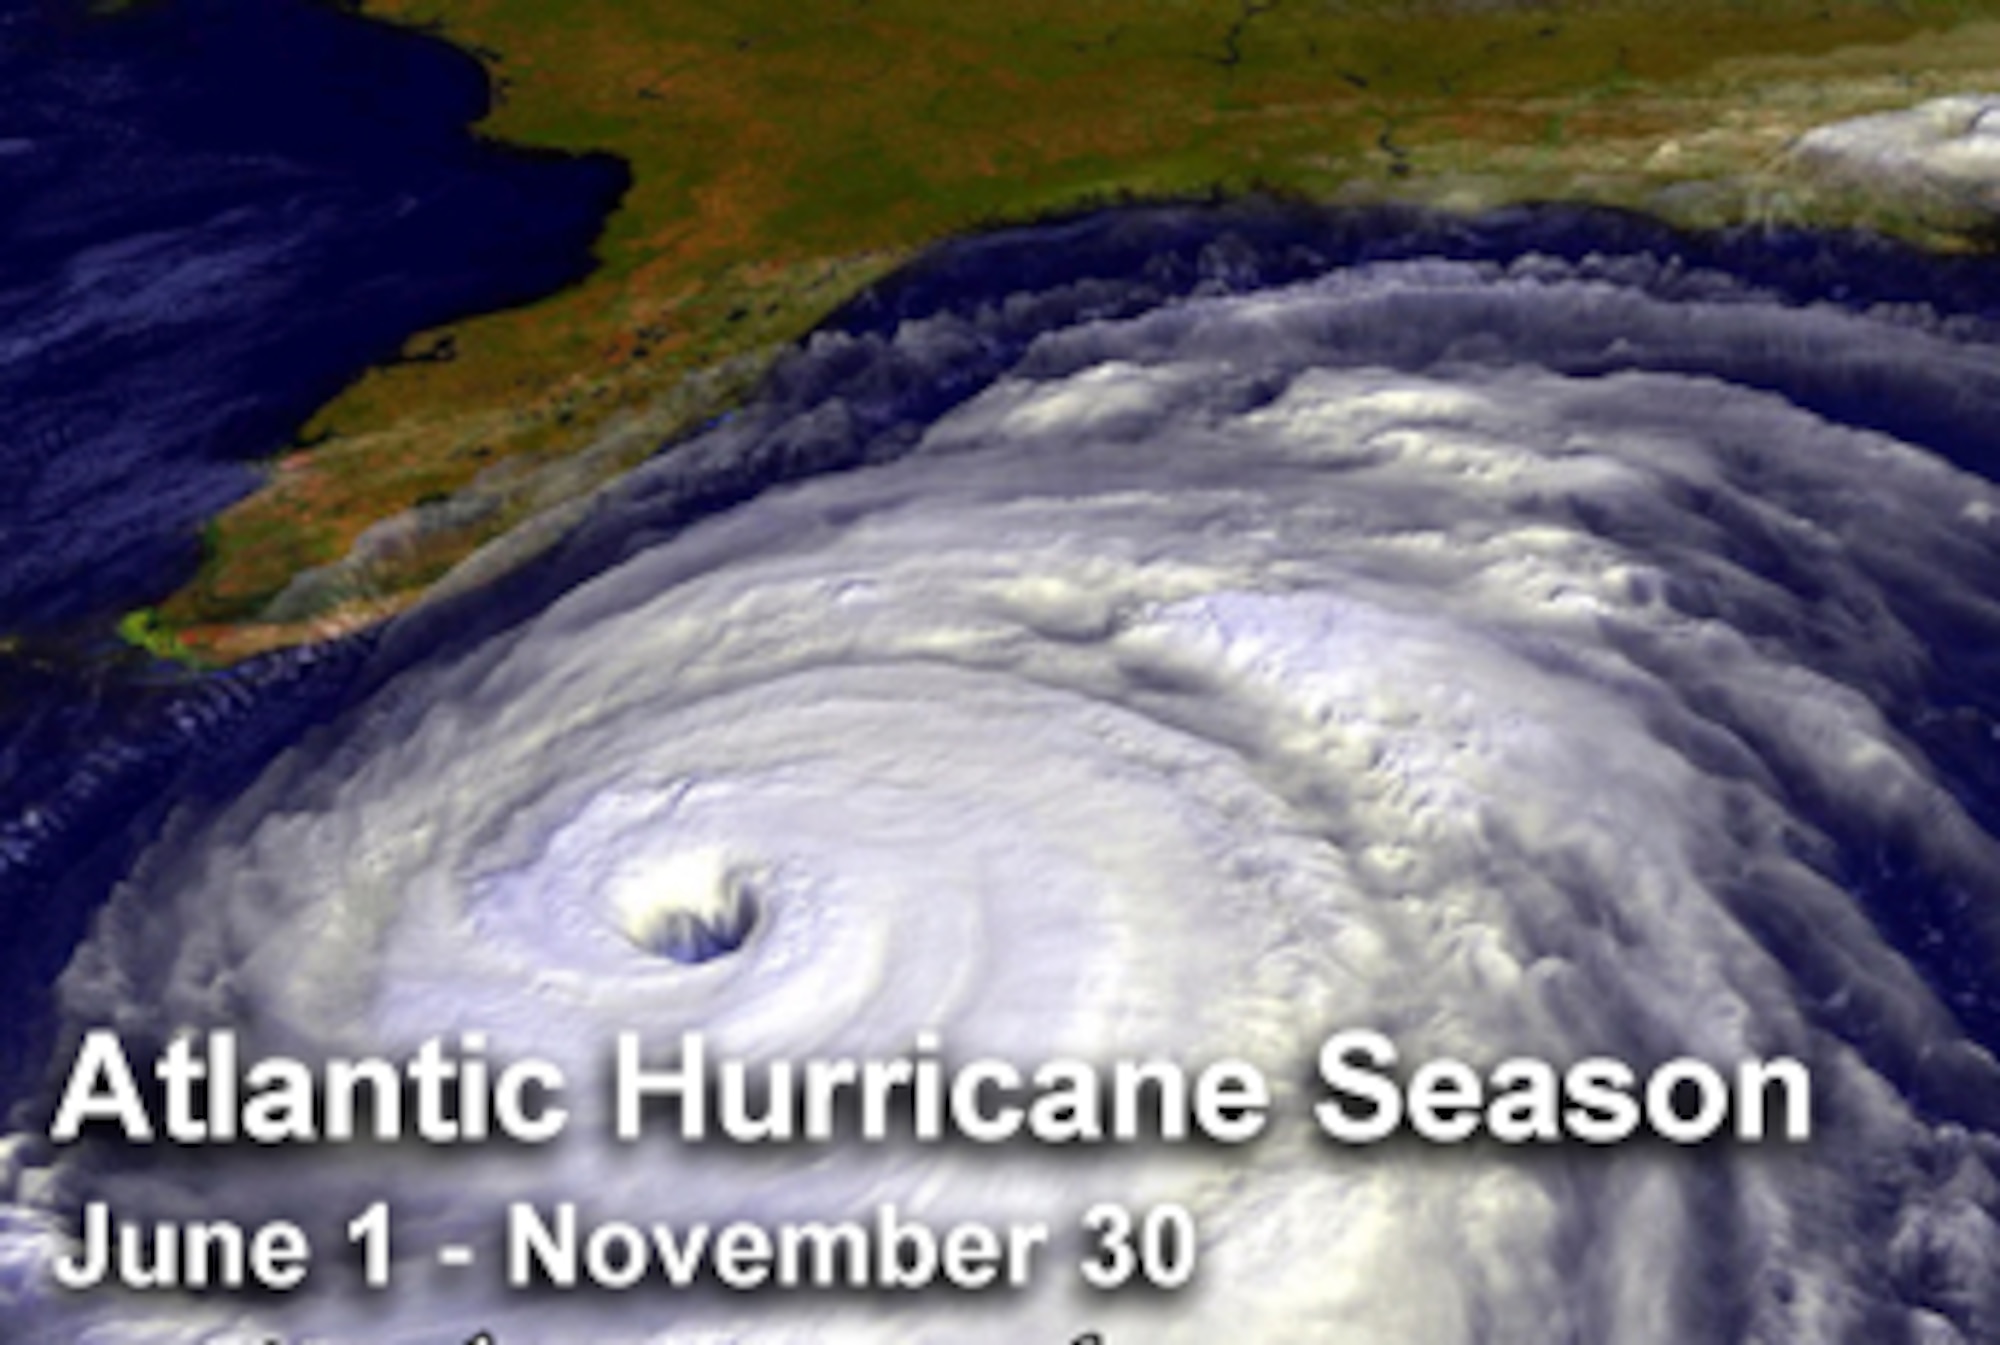 National Hurricane Center officials predict the Atlantic hurricane season to have a 75 percent chance of being an "above average" season. NHC forecasters predict the 2007 Atlantic hurricane season will have 13 to 17 named storms. Hurricane season officially began June 1 and continues through Nov. 30. (U.S. Air Force illustration)